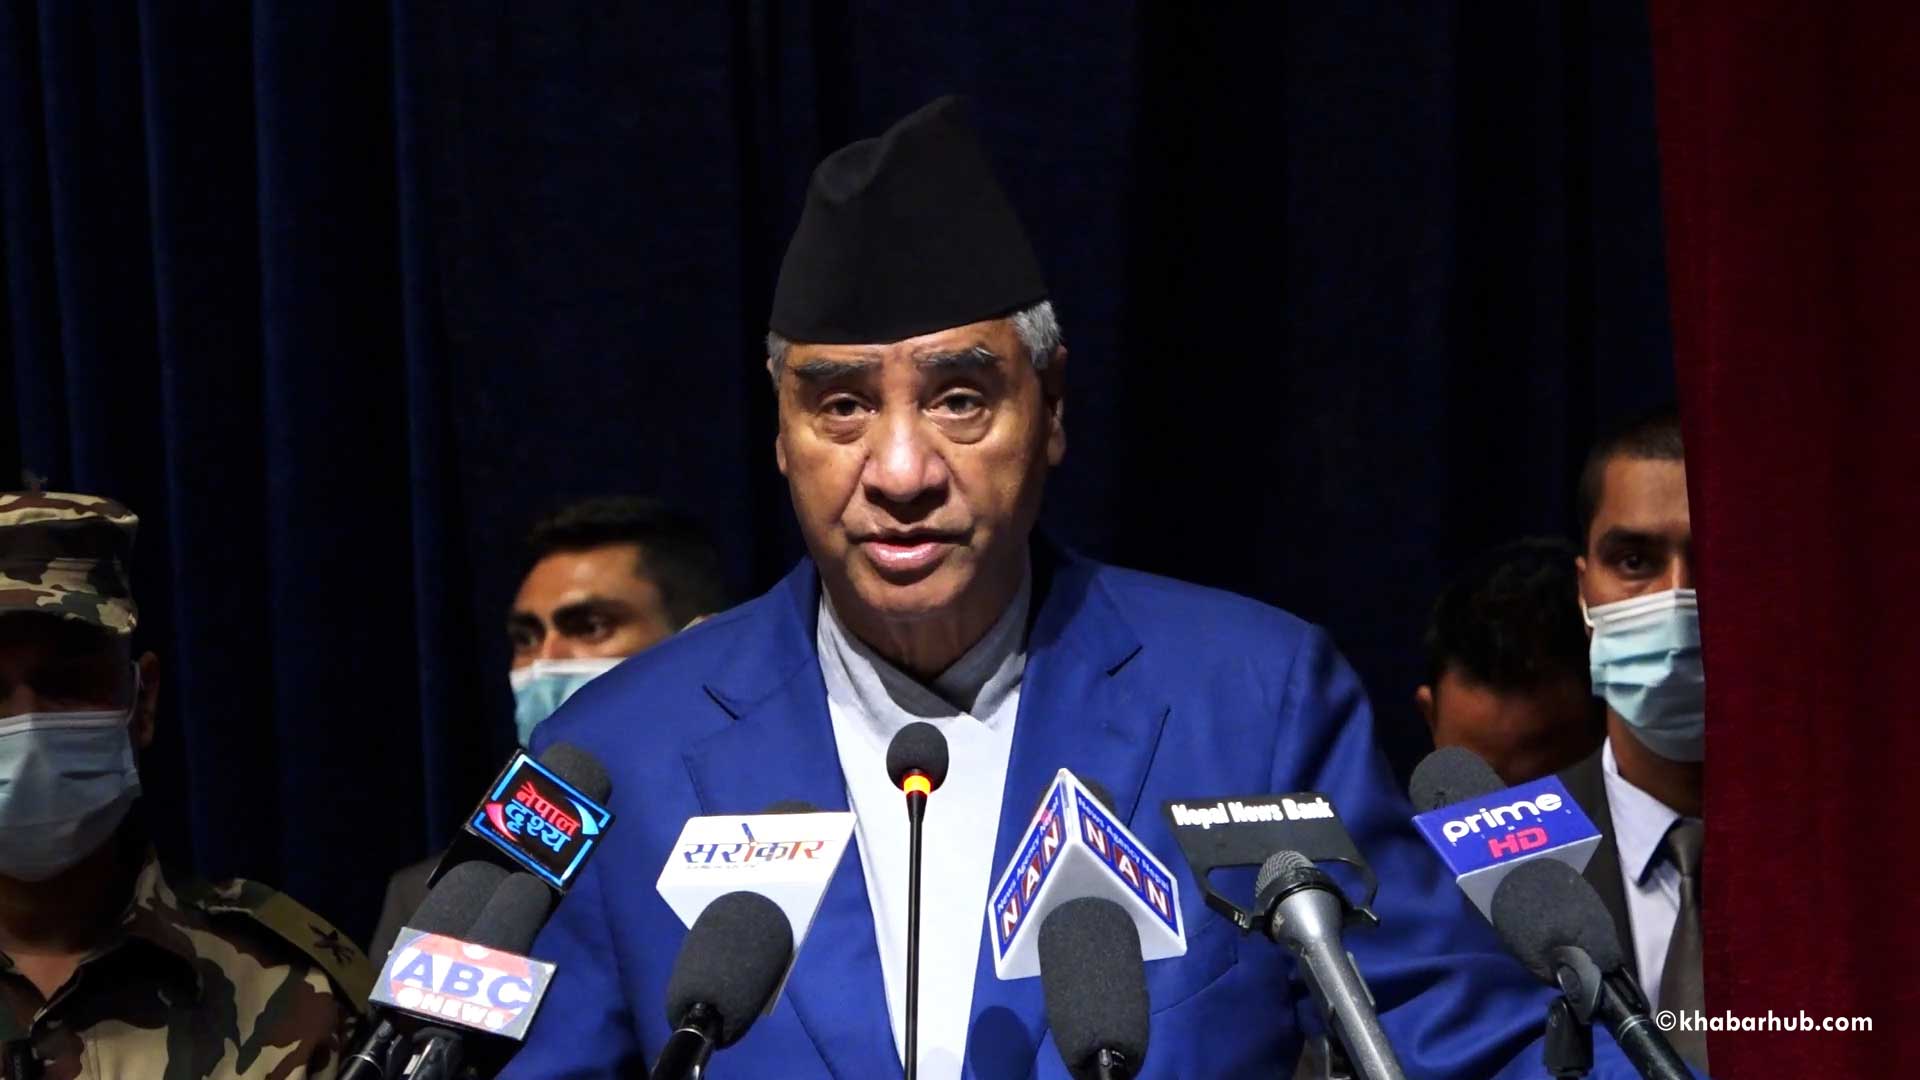 PM Deuba to inform House about his US visit once the visit is officially confirmed